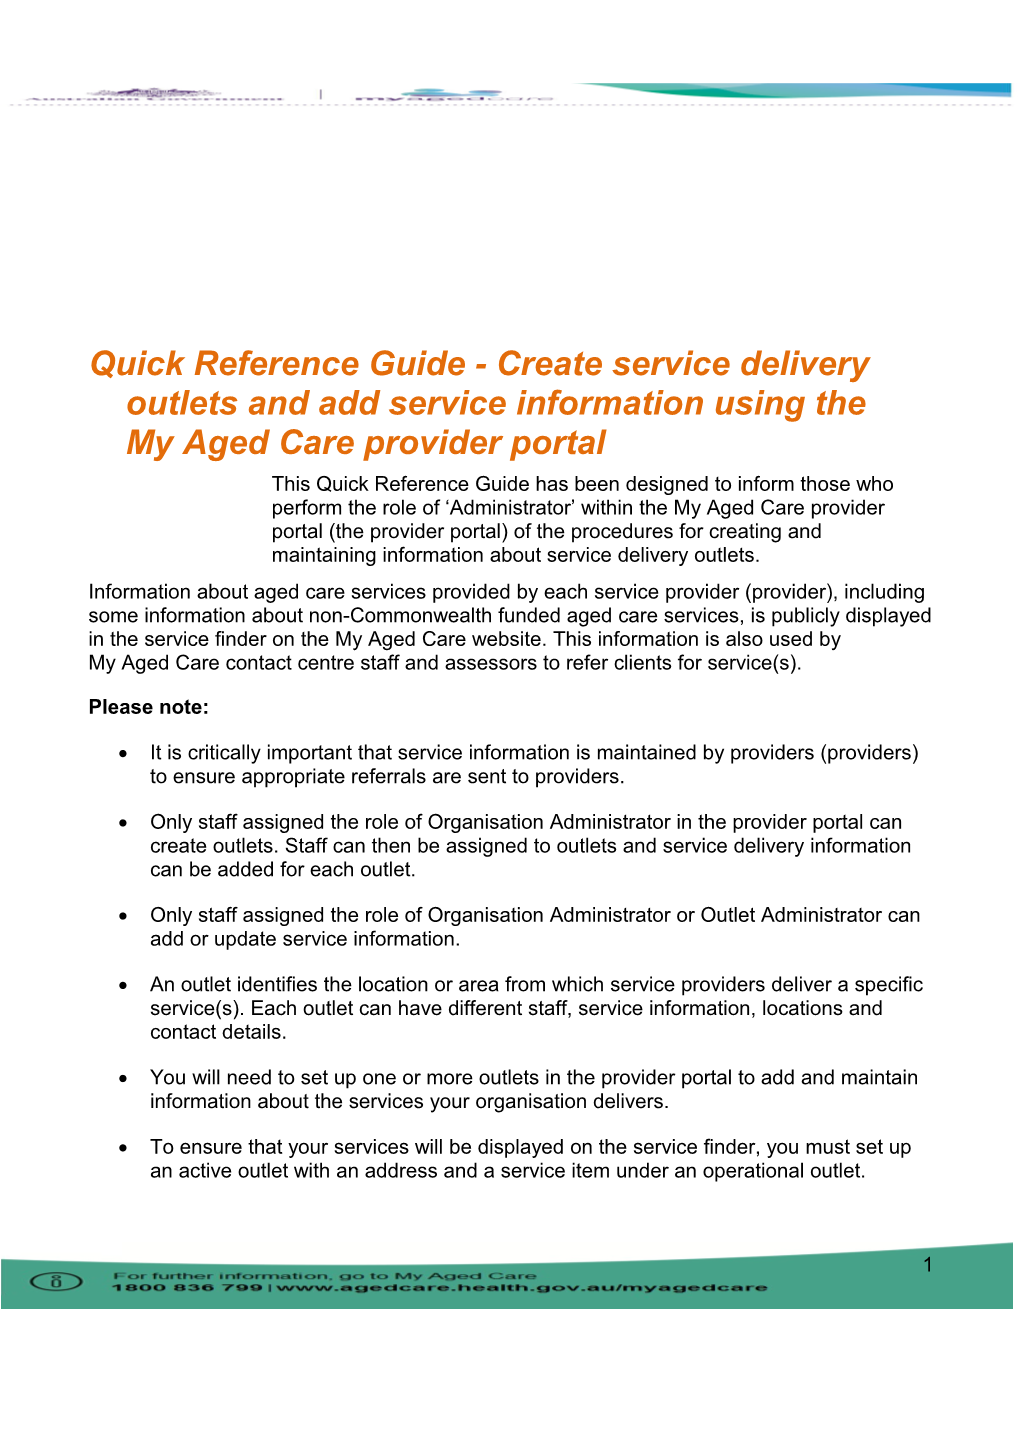 Quick Reference Guide - Create Service Delivery Outlets and Add Service Information Using